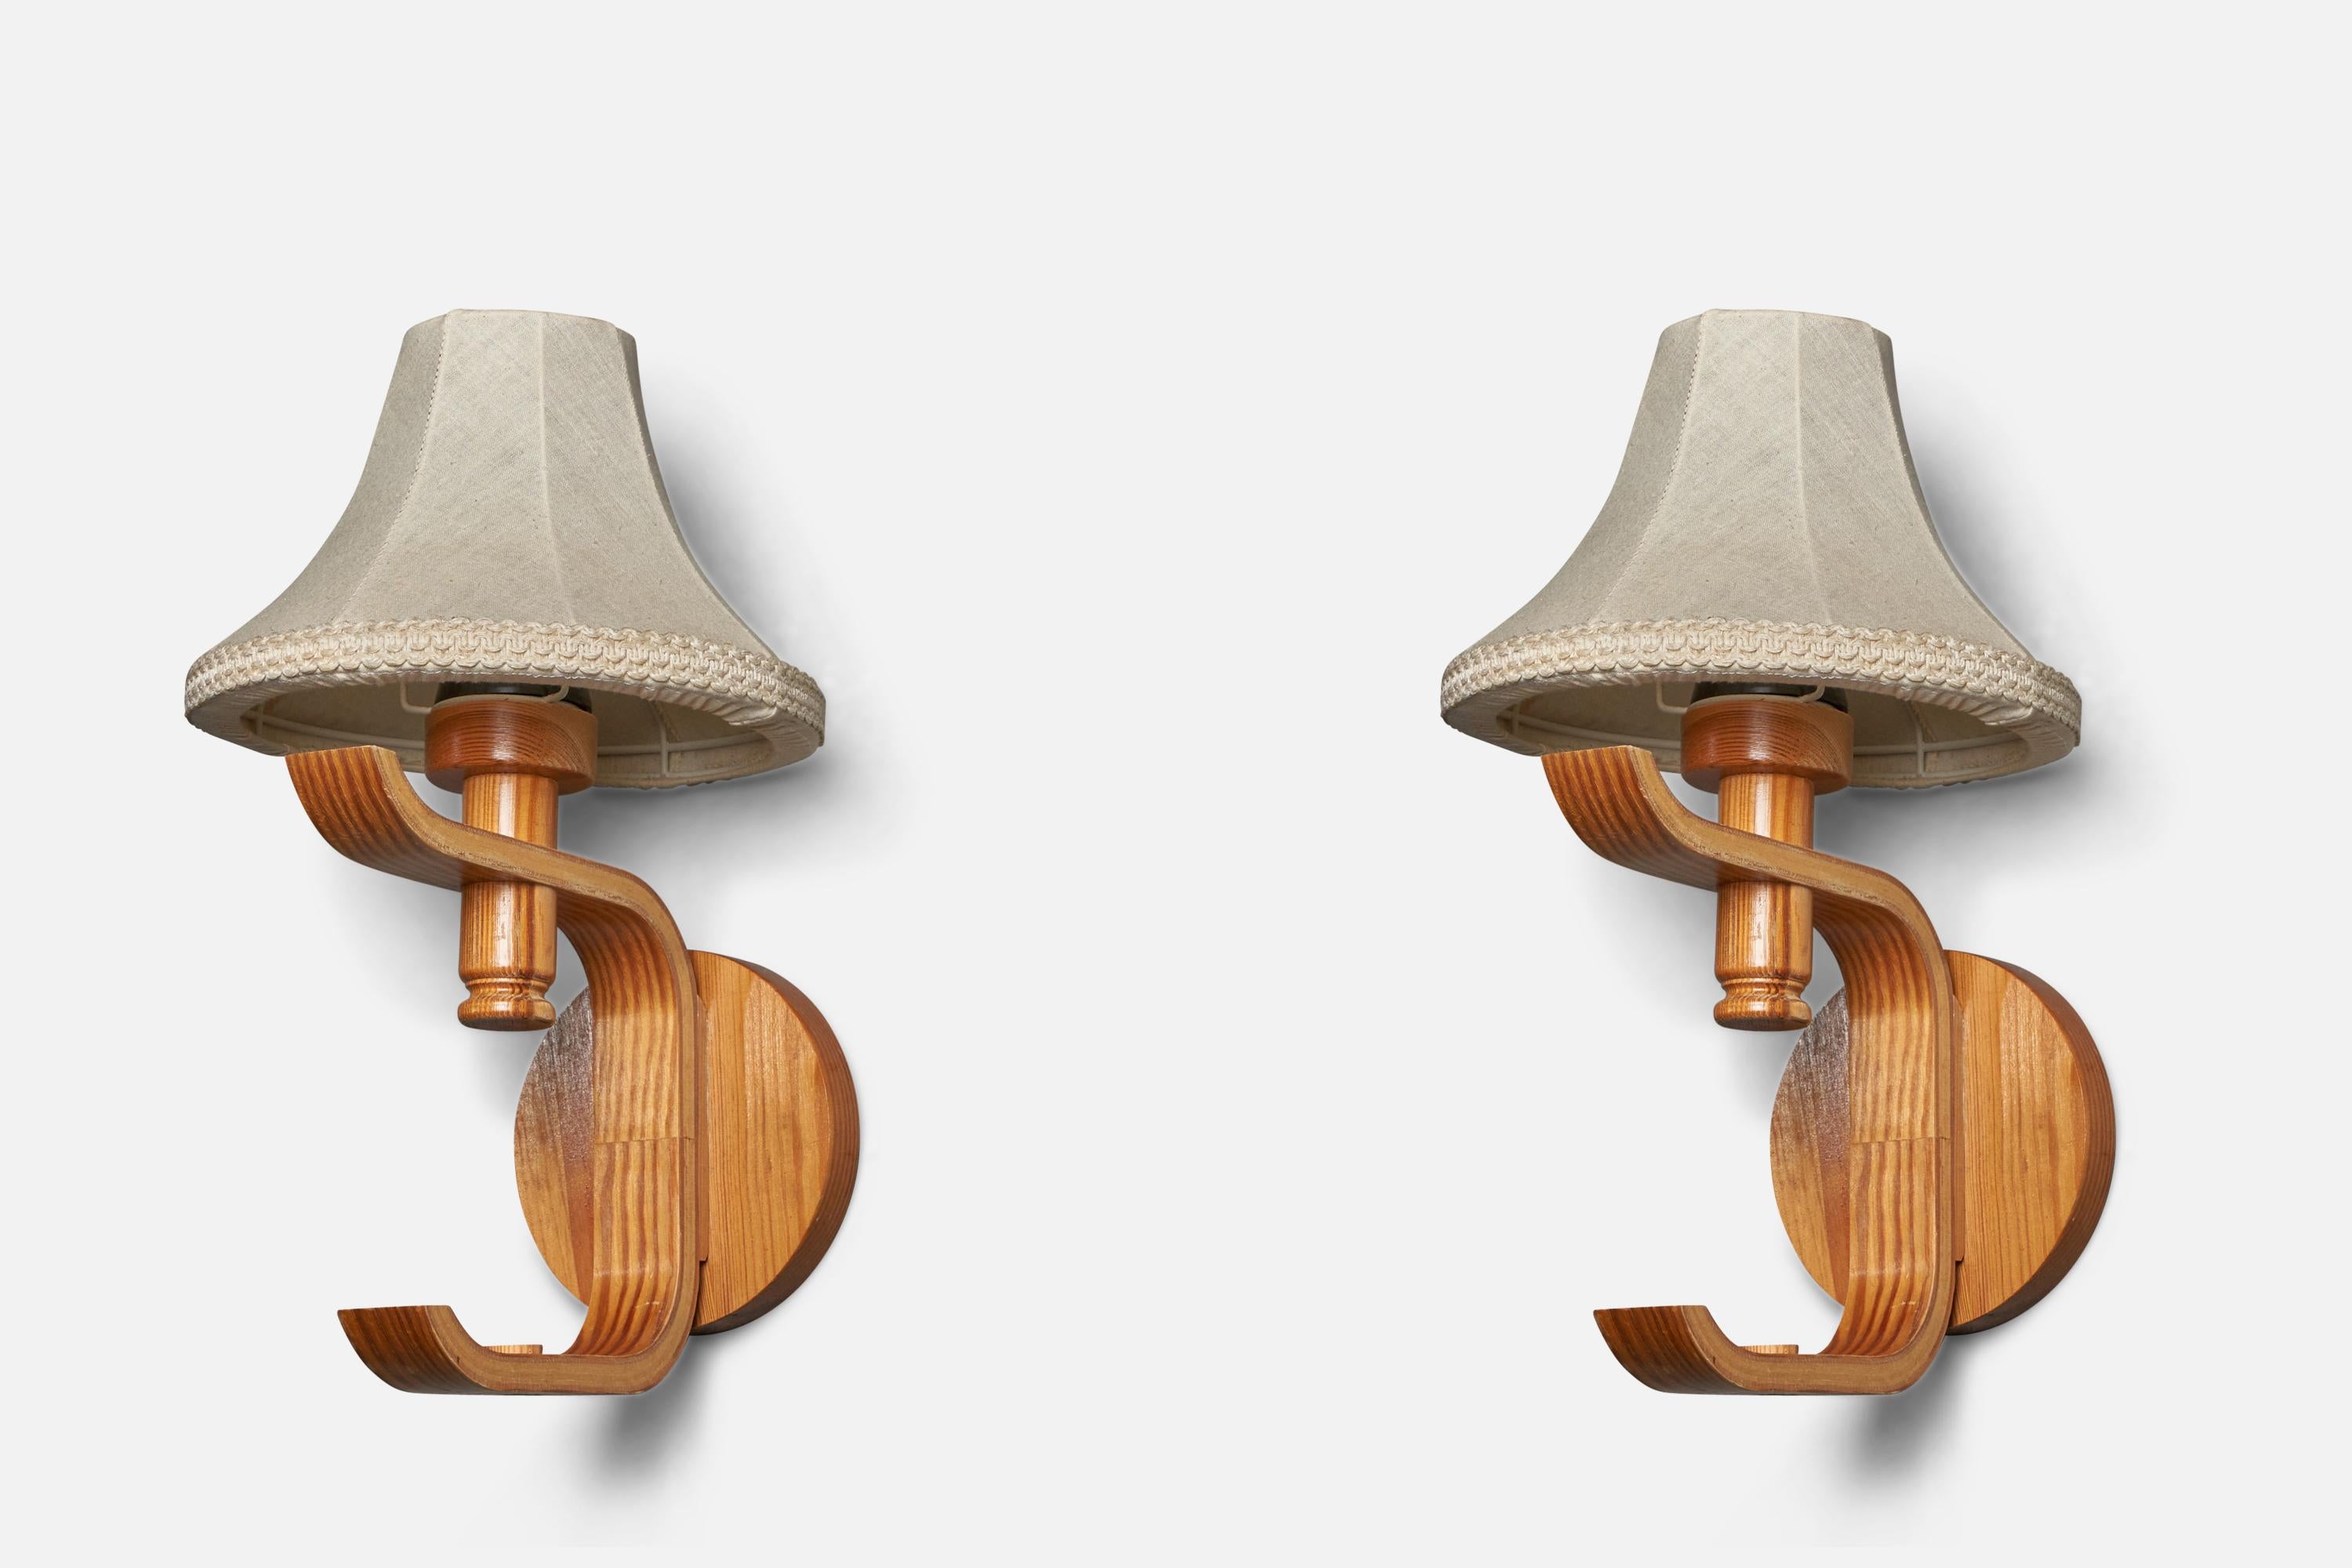 A pair of pine, moulded pine and off-white fabric wall lights designed and produced in Sweden, 1970s.

Overall Dimensions (inches): 15” H x 8.5” W x 8.75” D
Back Plate Dimensions (inches): 5.4” Diameter x 0.75” D 
Bulb Specifications: E-26